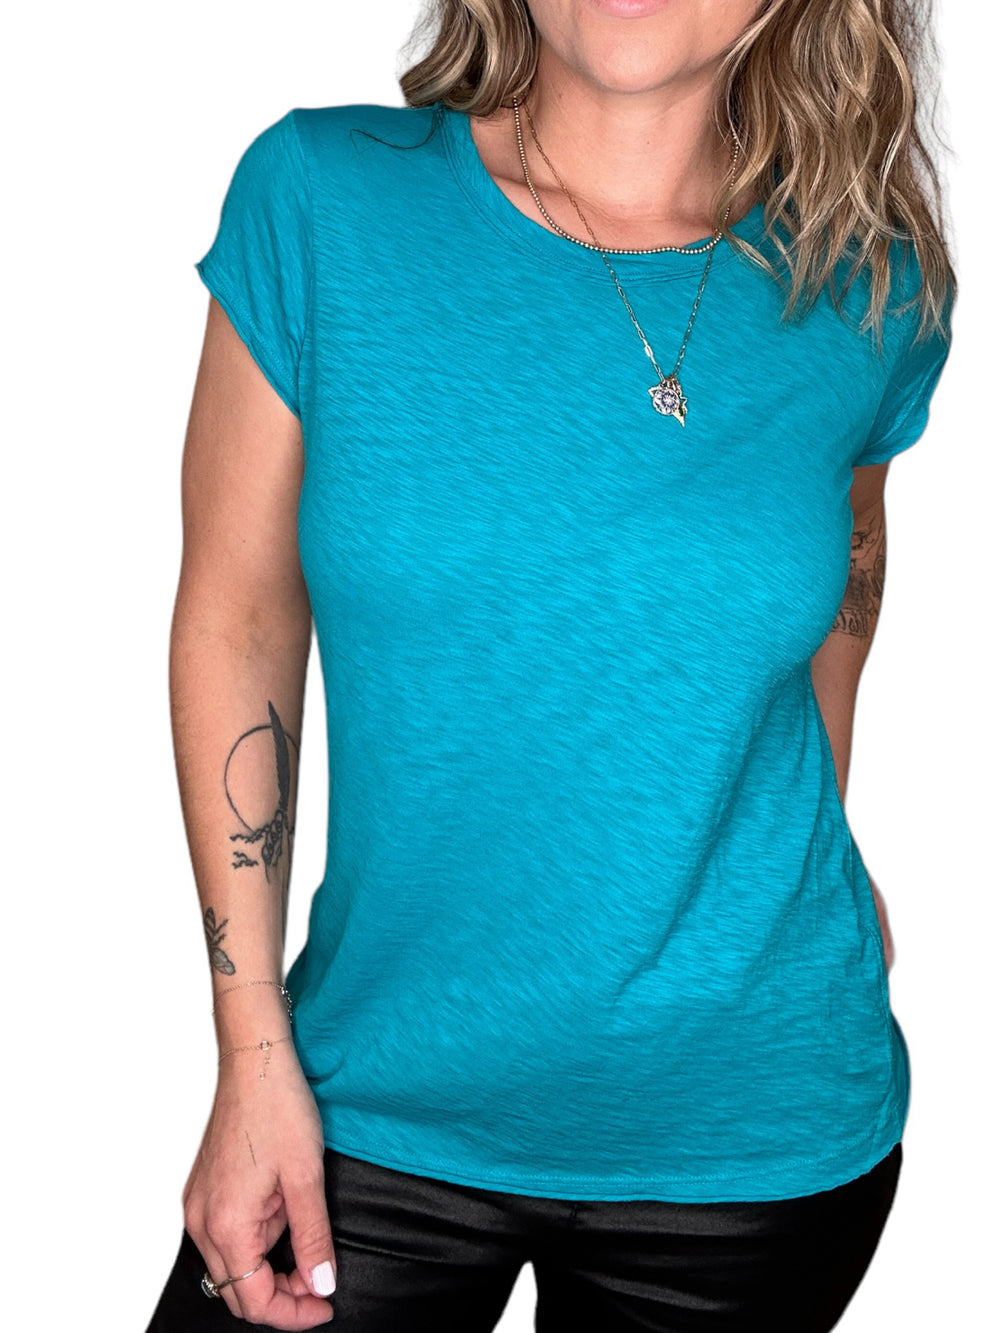 TRUDY CREW NECK TOP - TIDAL - Kingfisher Road - Online Boutique